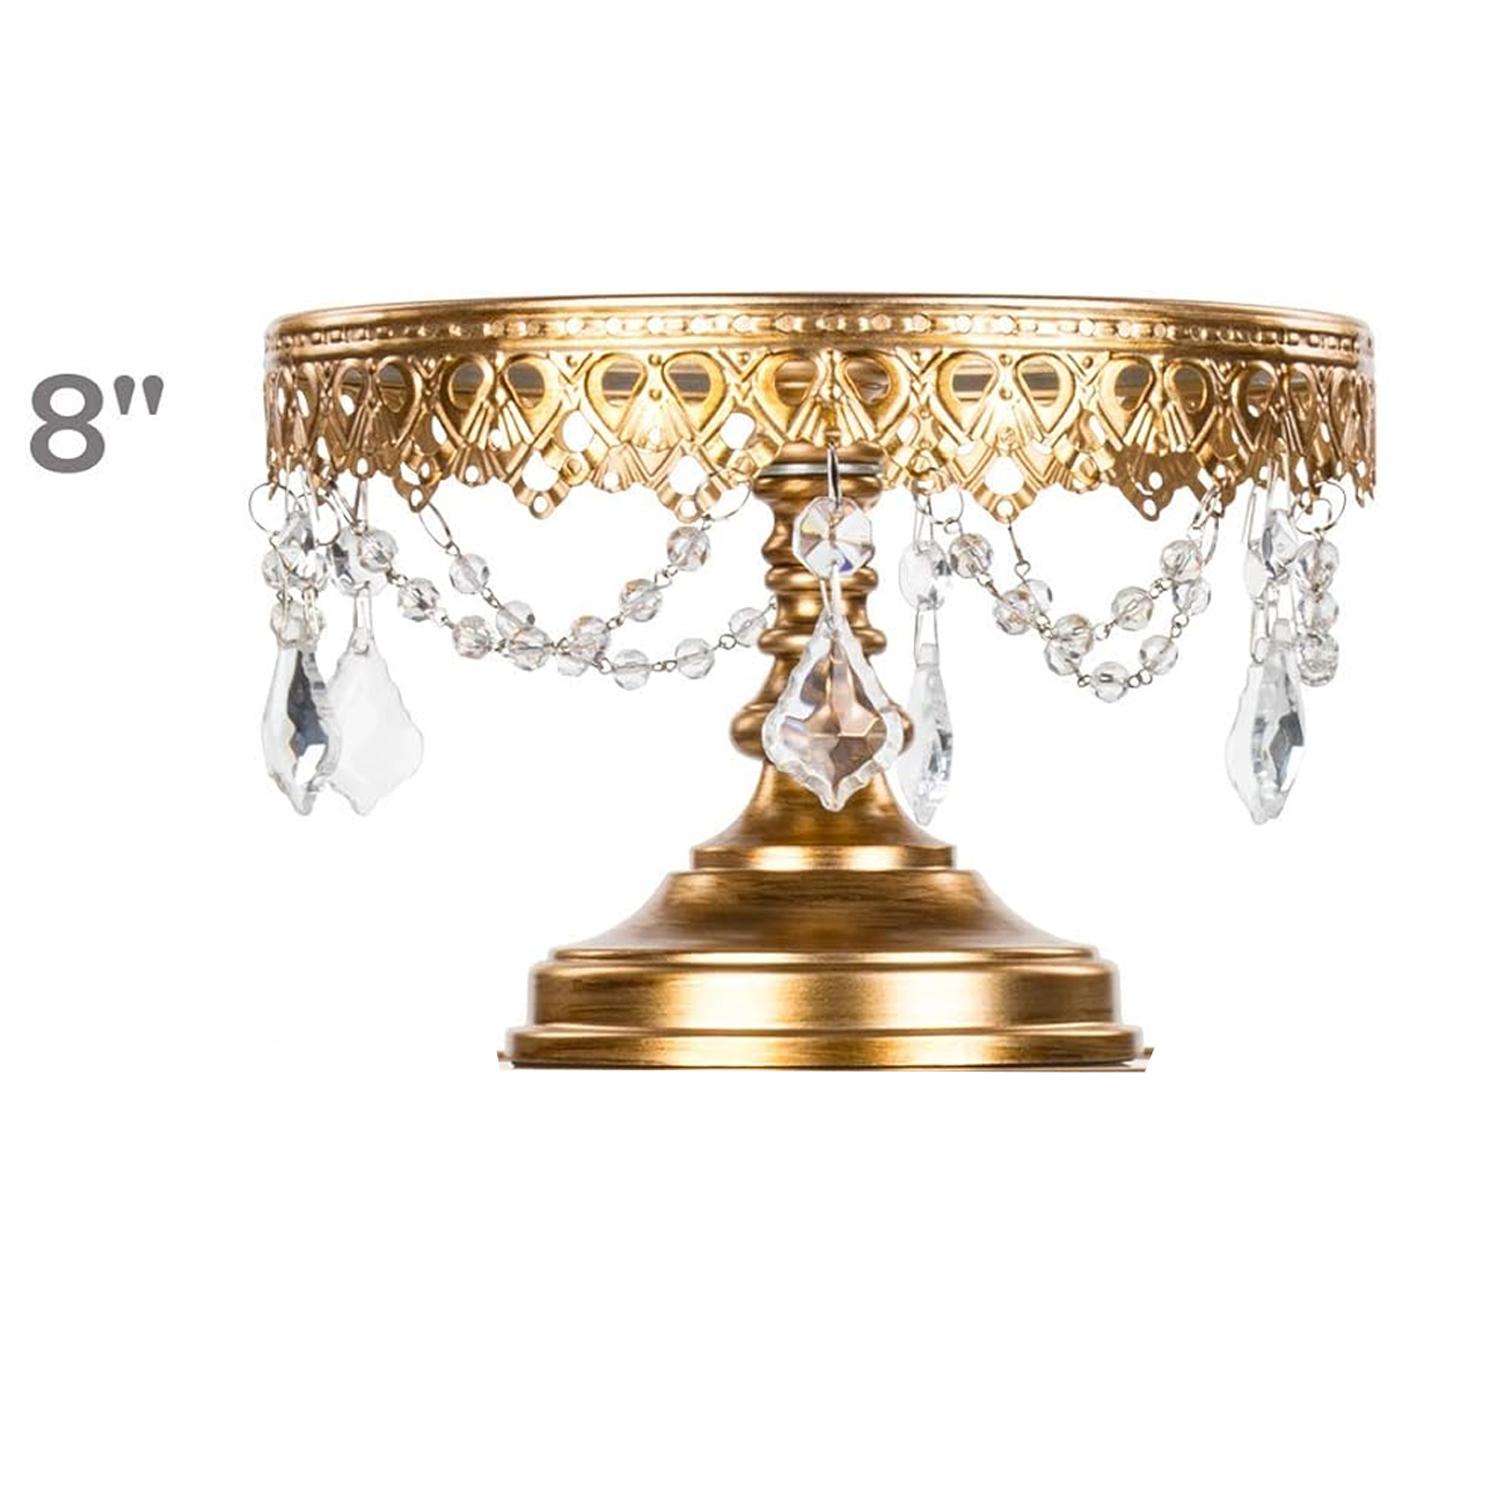 1PC GOLD CLEAR GLASS TOP CAKE STAND DIAMETER 20CM